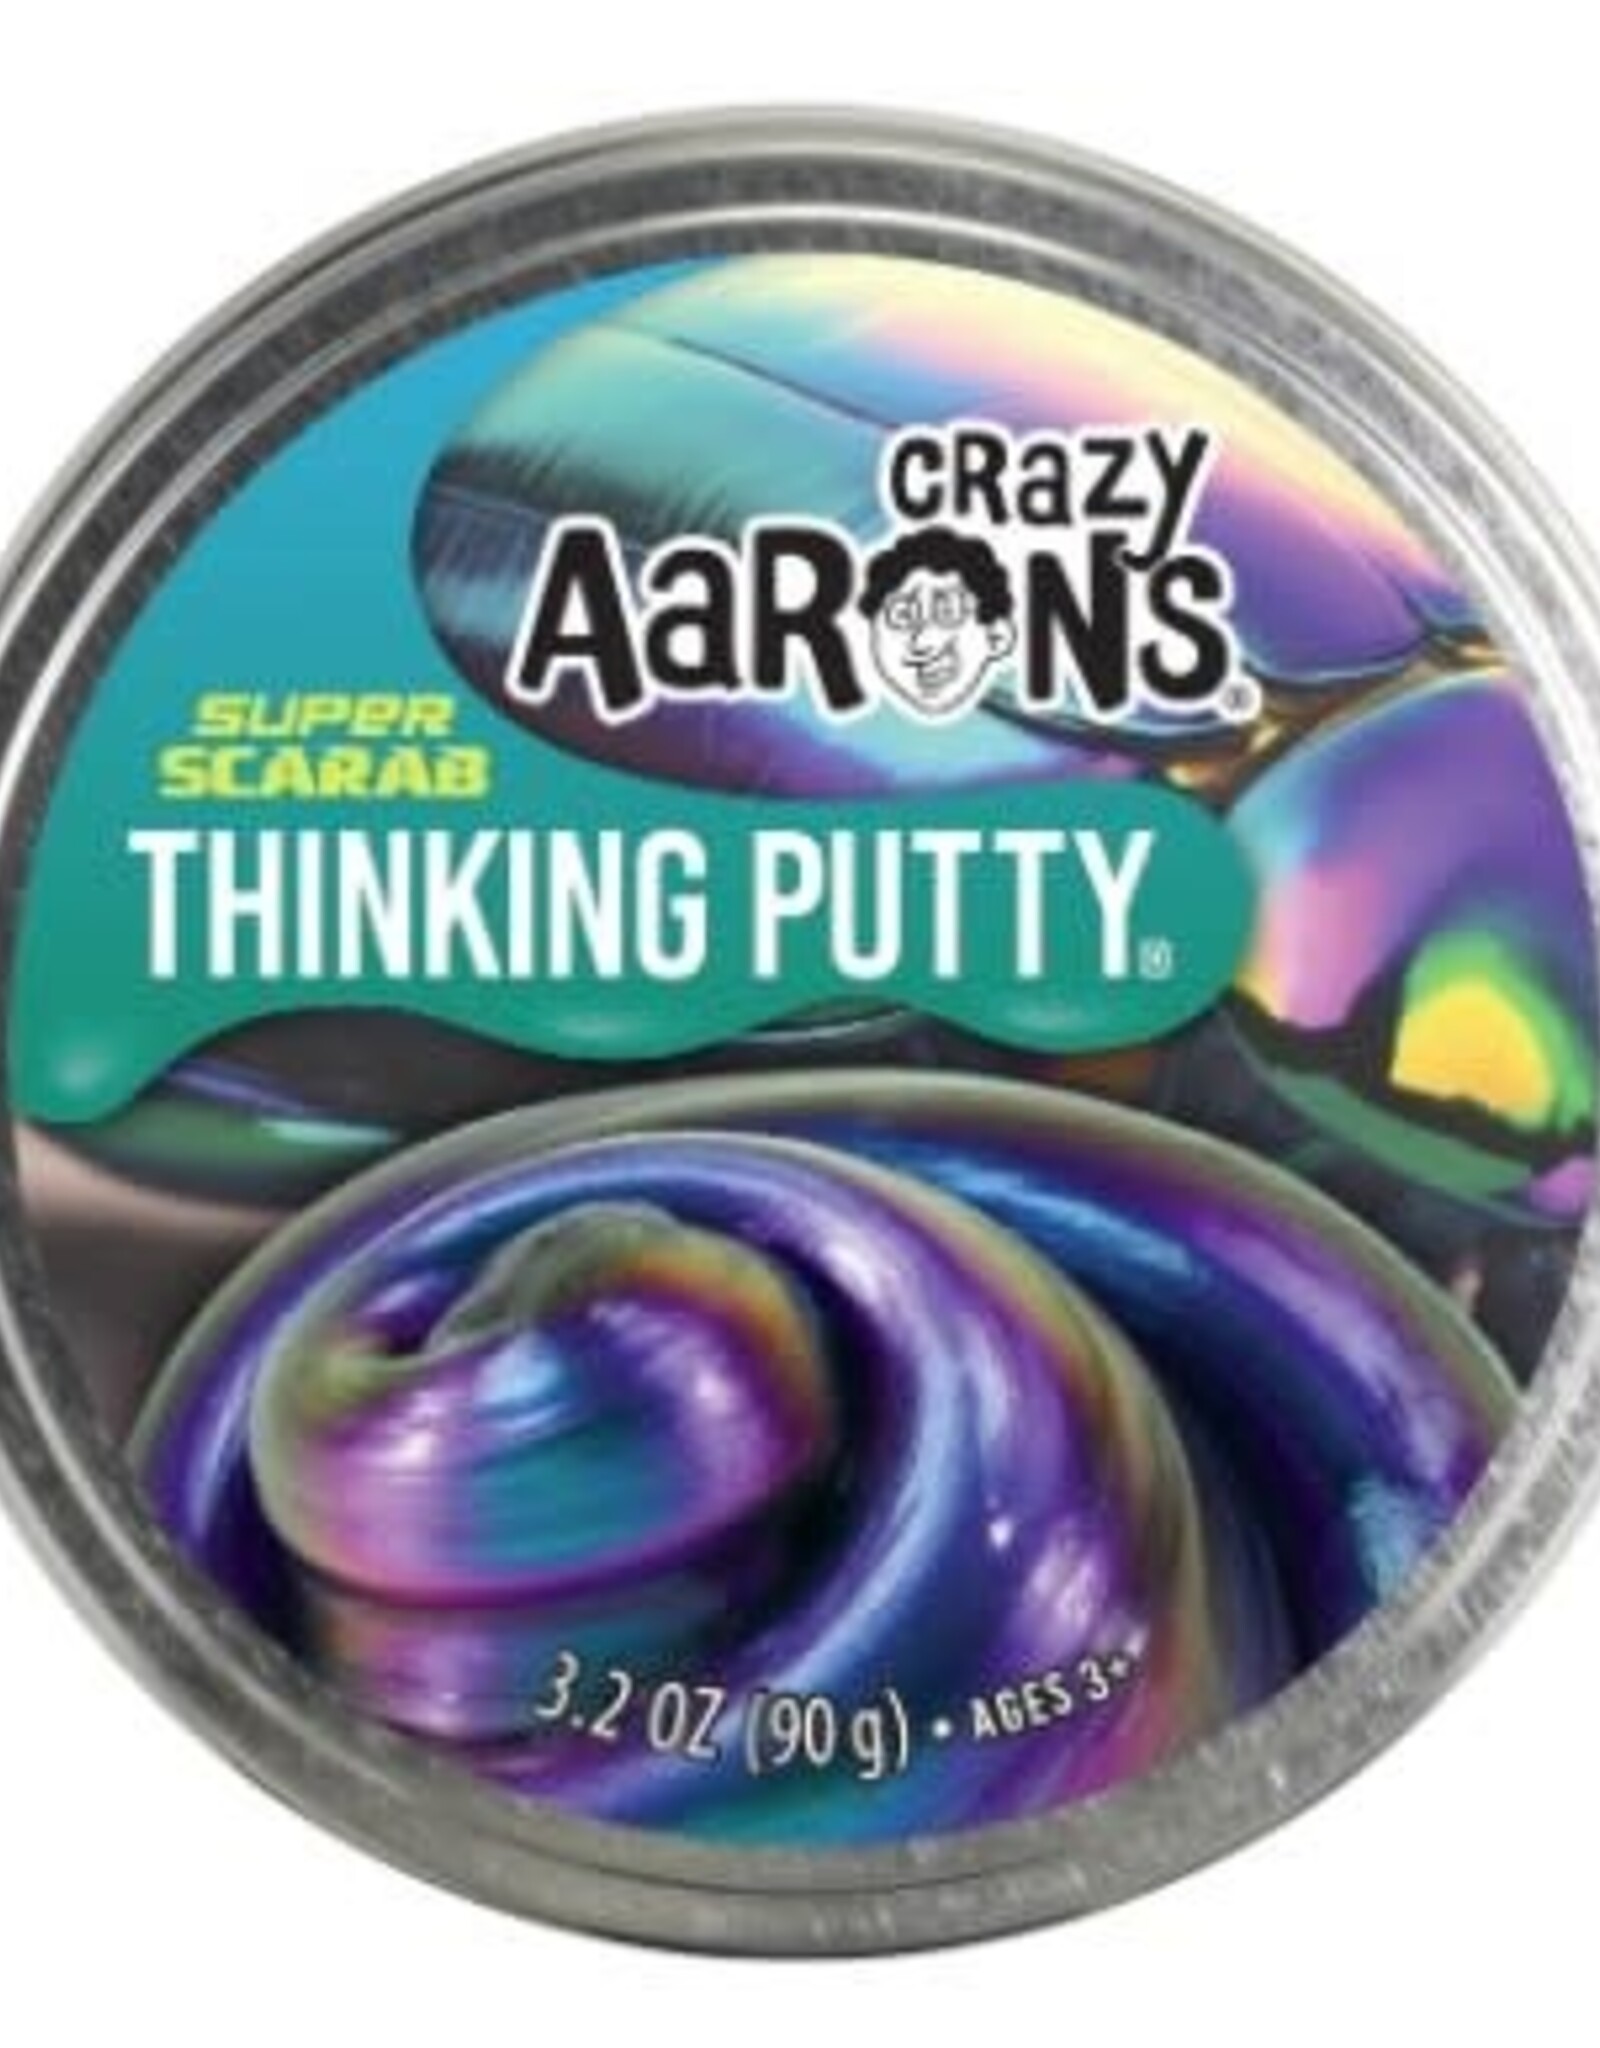 Crazy Aaron's Thinking Putty Crazy Aaron's Illusion Putty 4" Tins